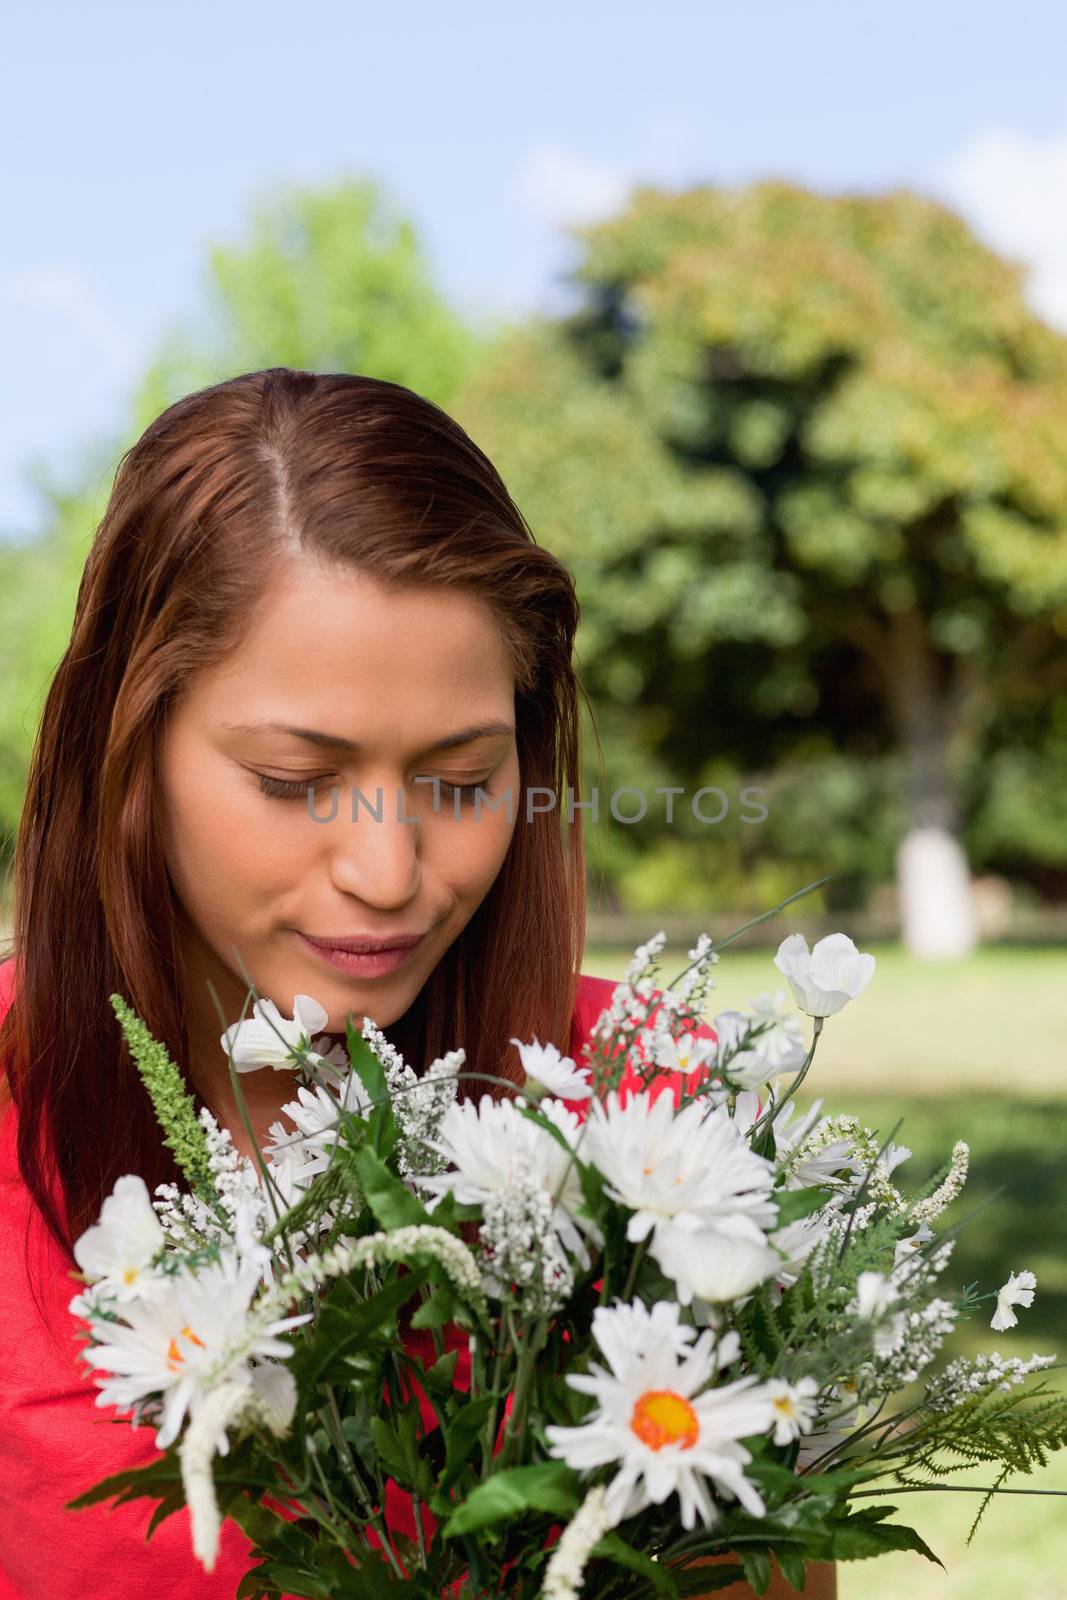 Young woman looking down at a flowers while standing in a park by Wavebreakmedia